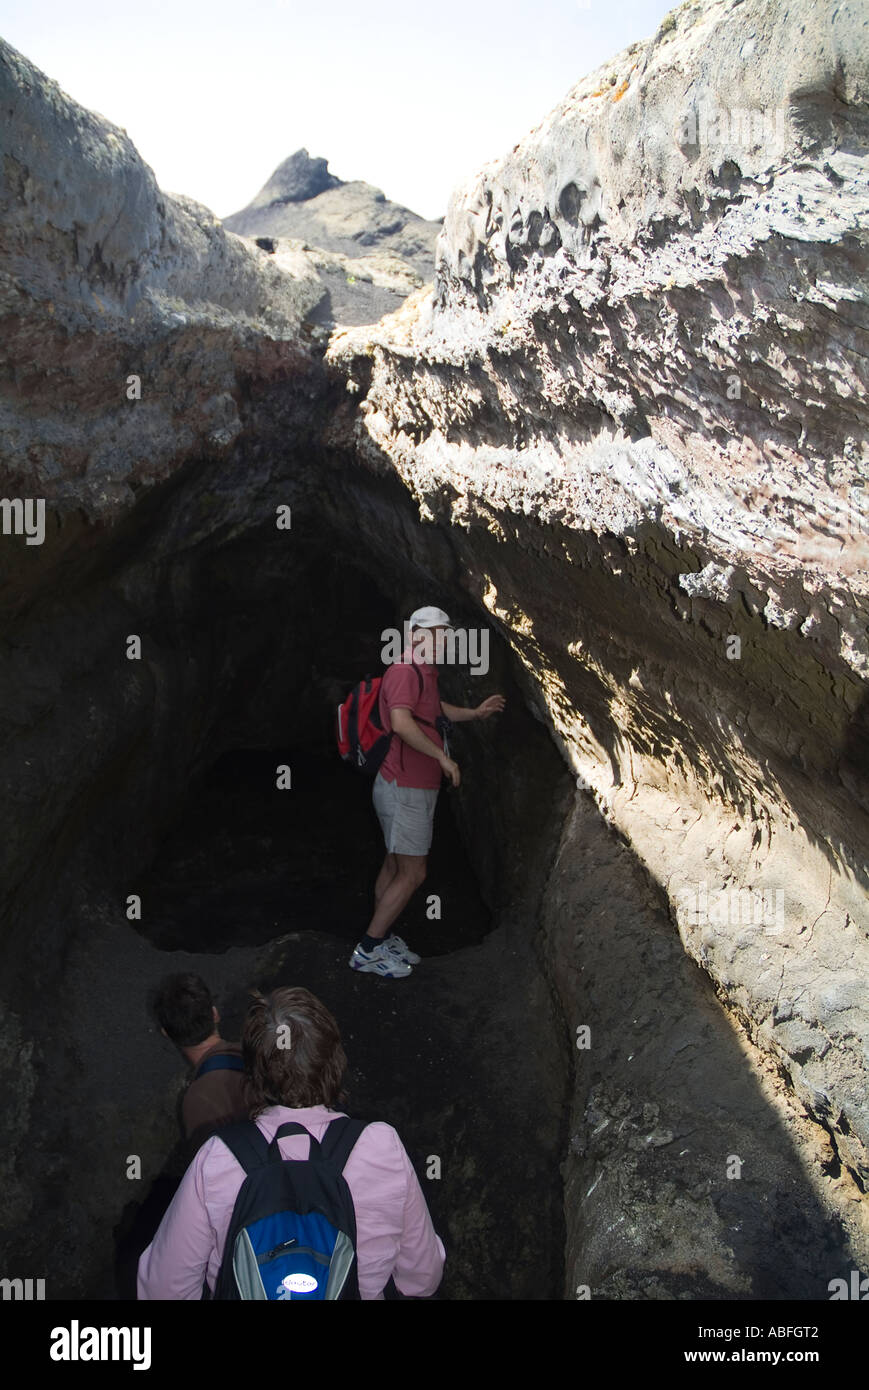 dh Timanfaya National Park TIMANFAYA LANZAROTE Guided tour hikers trekking in pahoehoe lava flow volcanic tunnel cave people Stock Photo